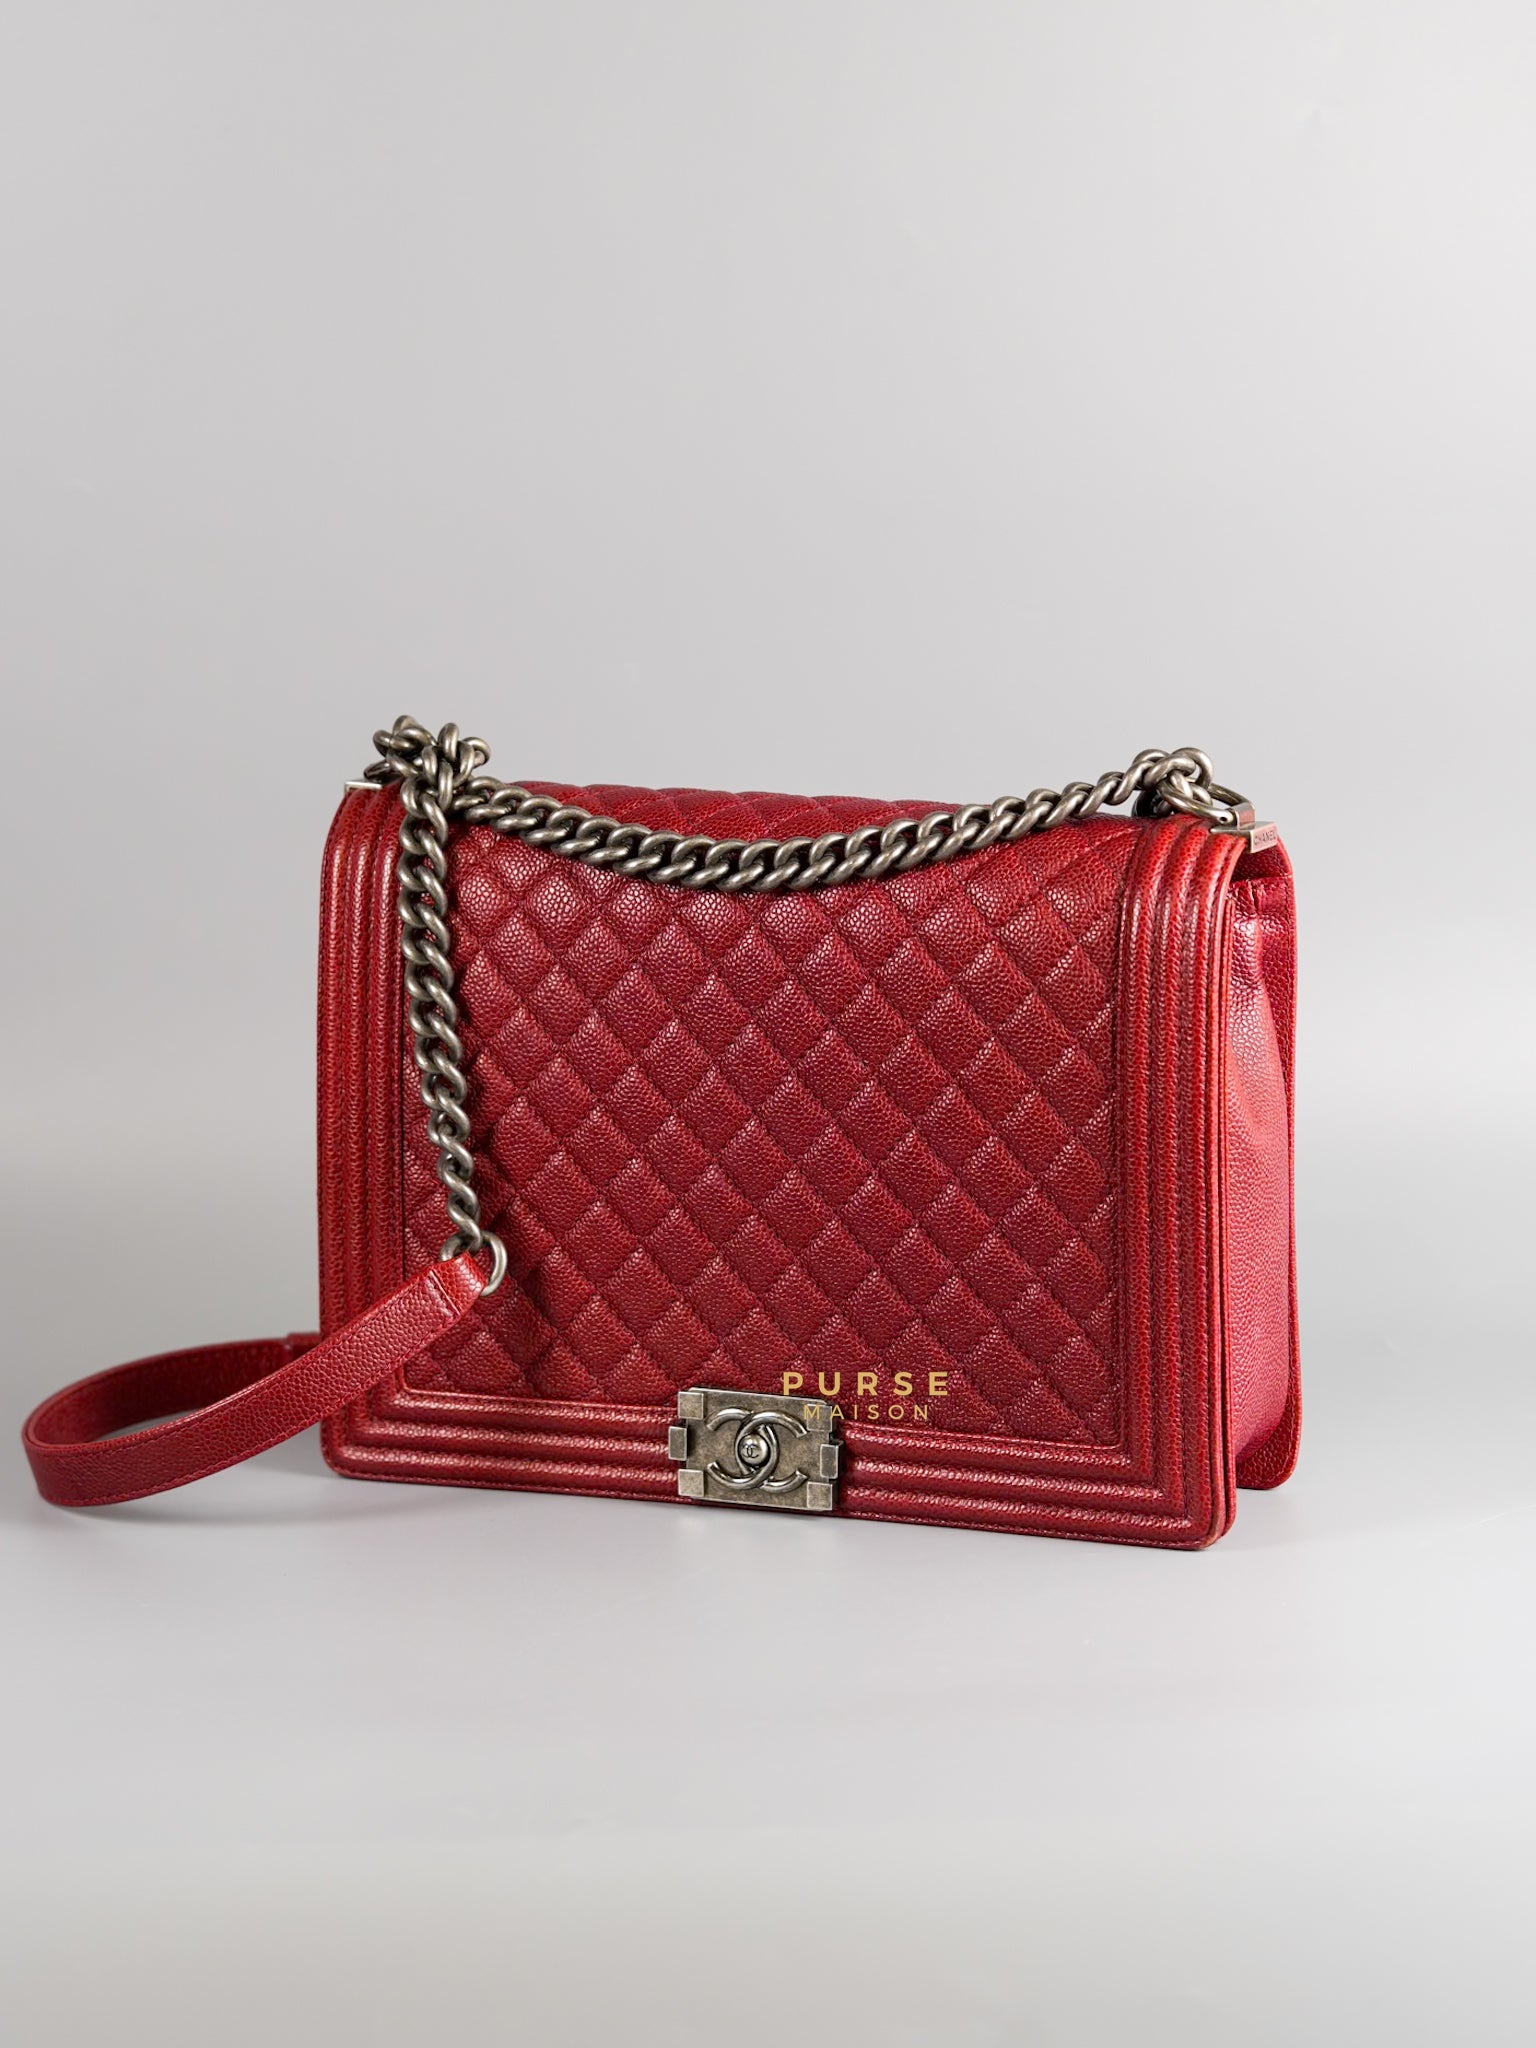 Boy Large in Red Caviar Leather and Ruthenium Hardware Series 19 | Purse Maison Luxury Bags Shop